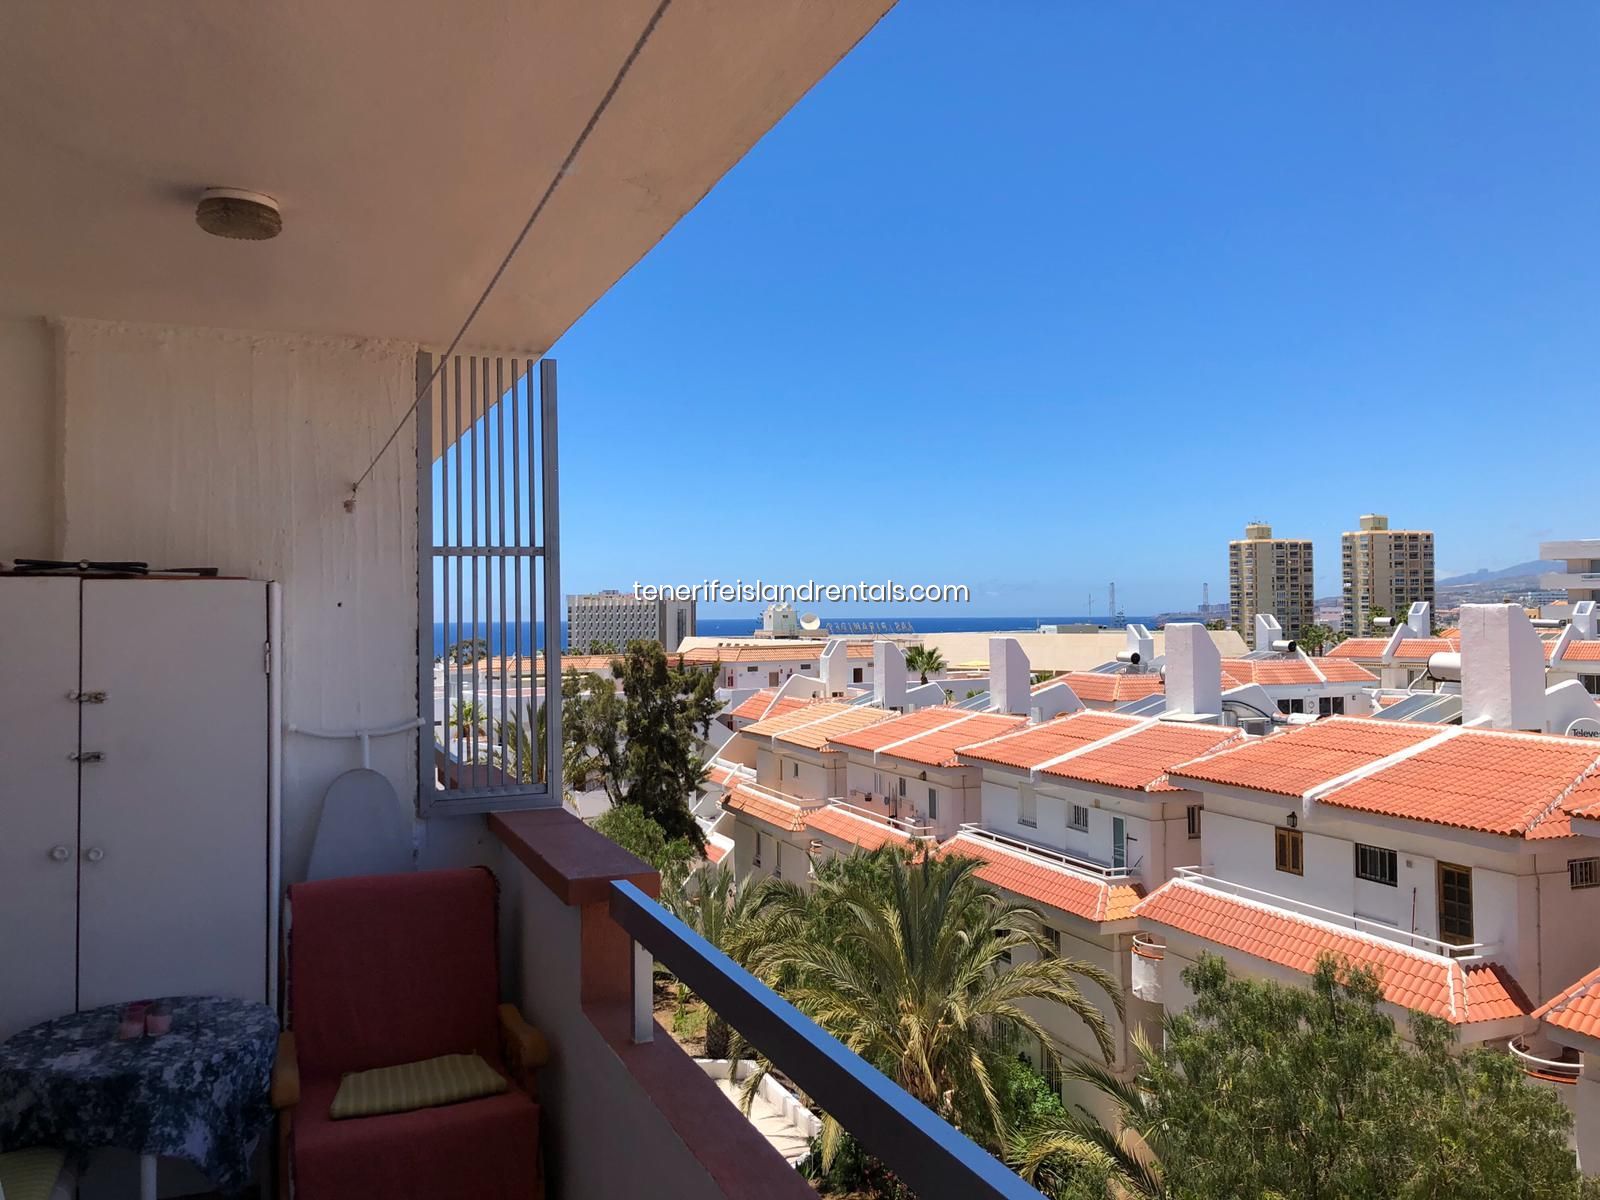 Apartment in Las Americas marketed by Tenerife Island Rentals